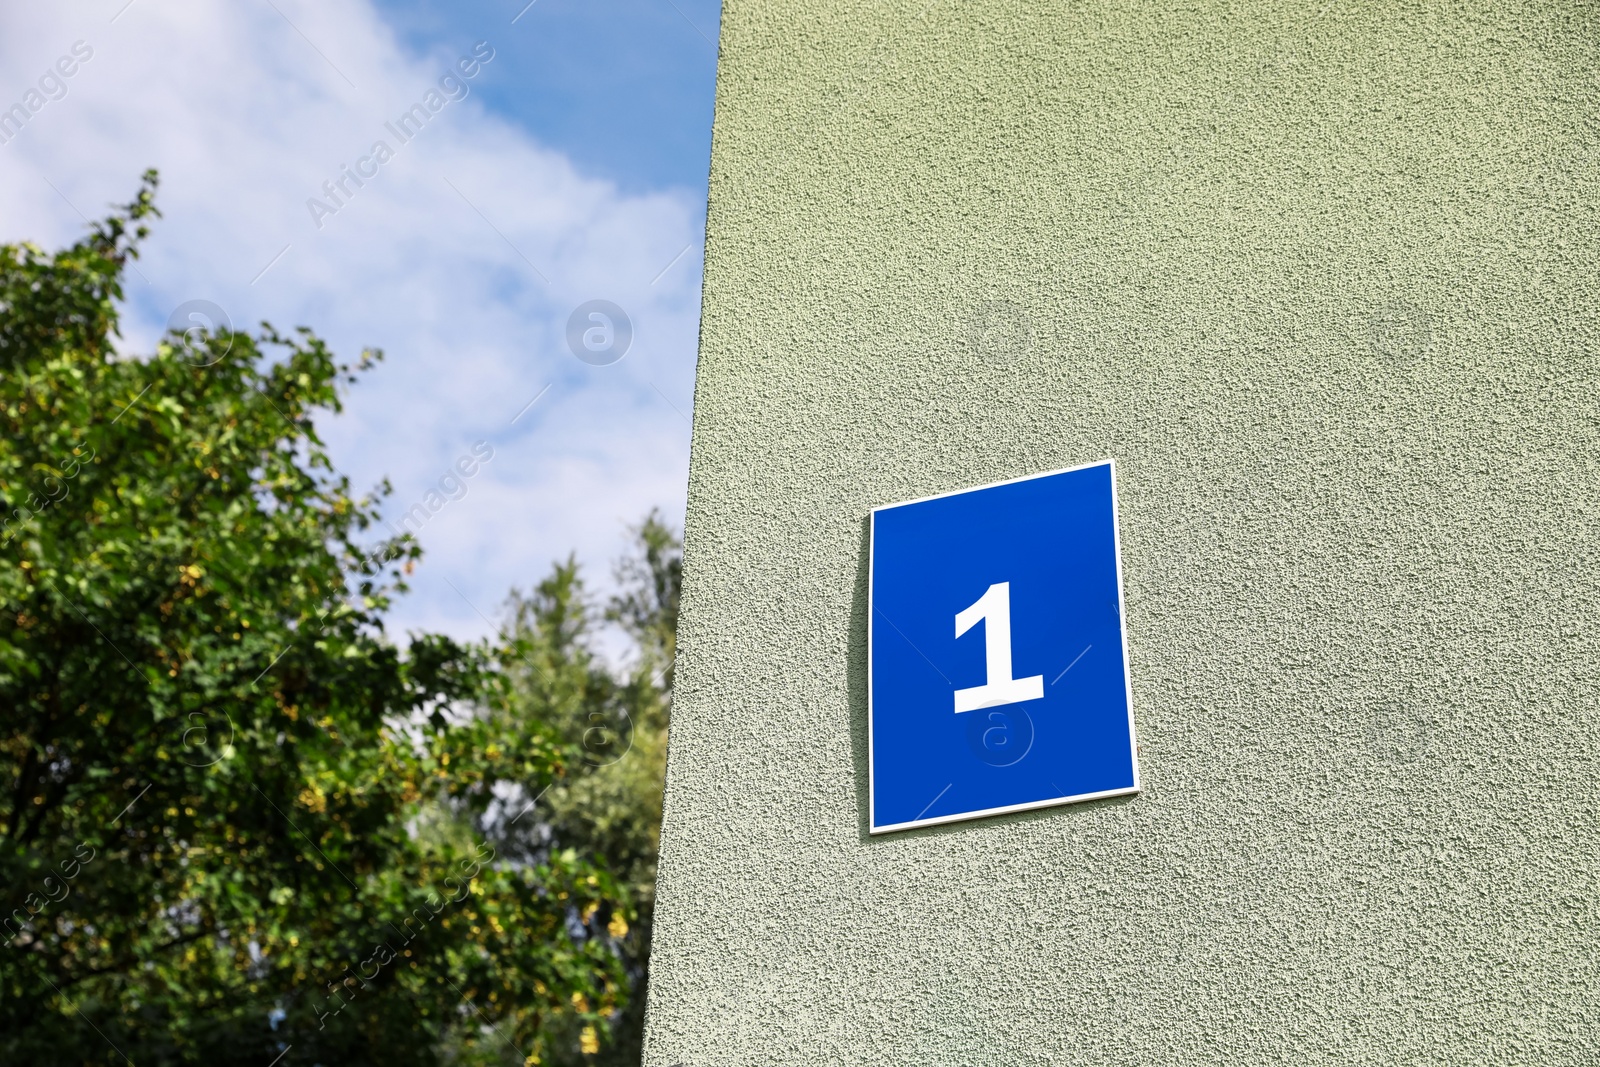 Photo of House number 1 on light green textured wall outdoors. Space for text